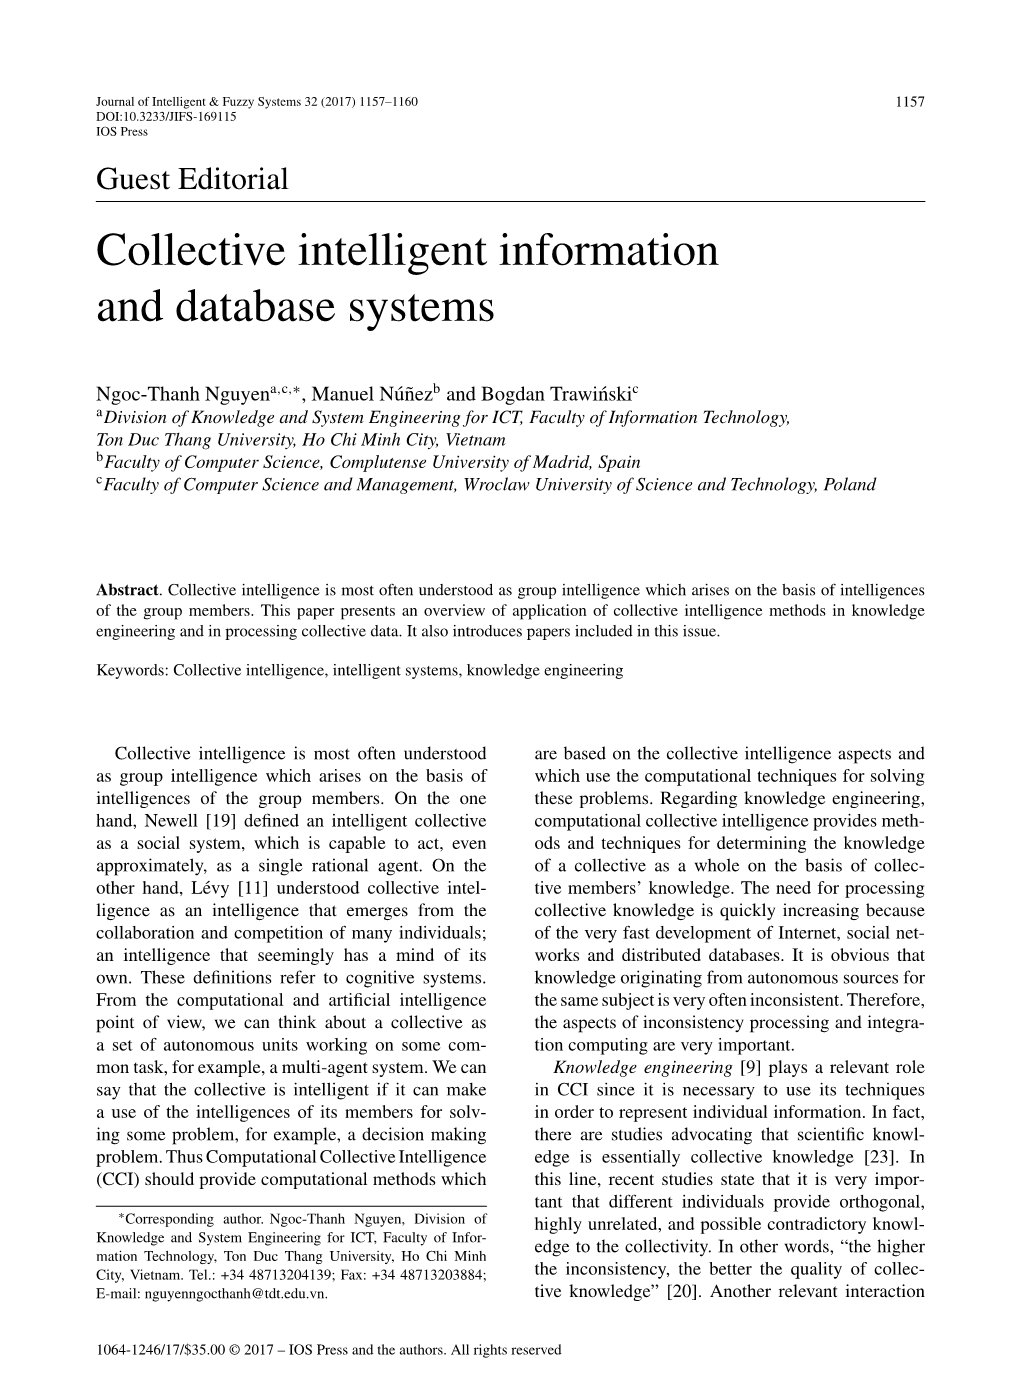 Collective Intelligent Information and Database Systems